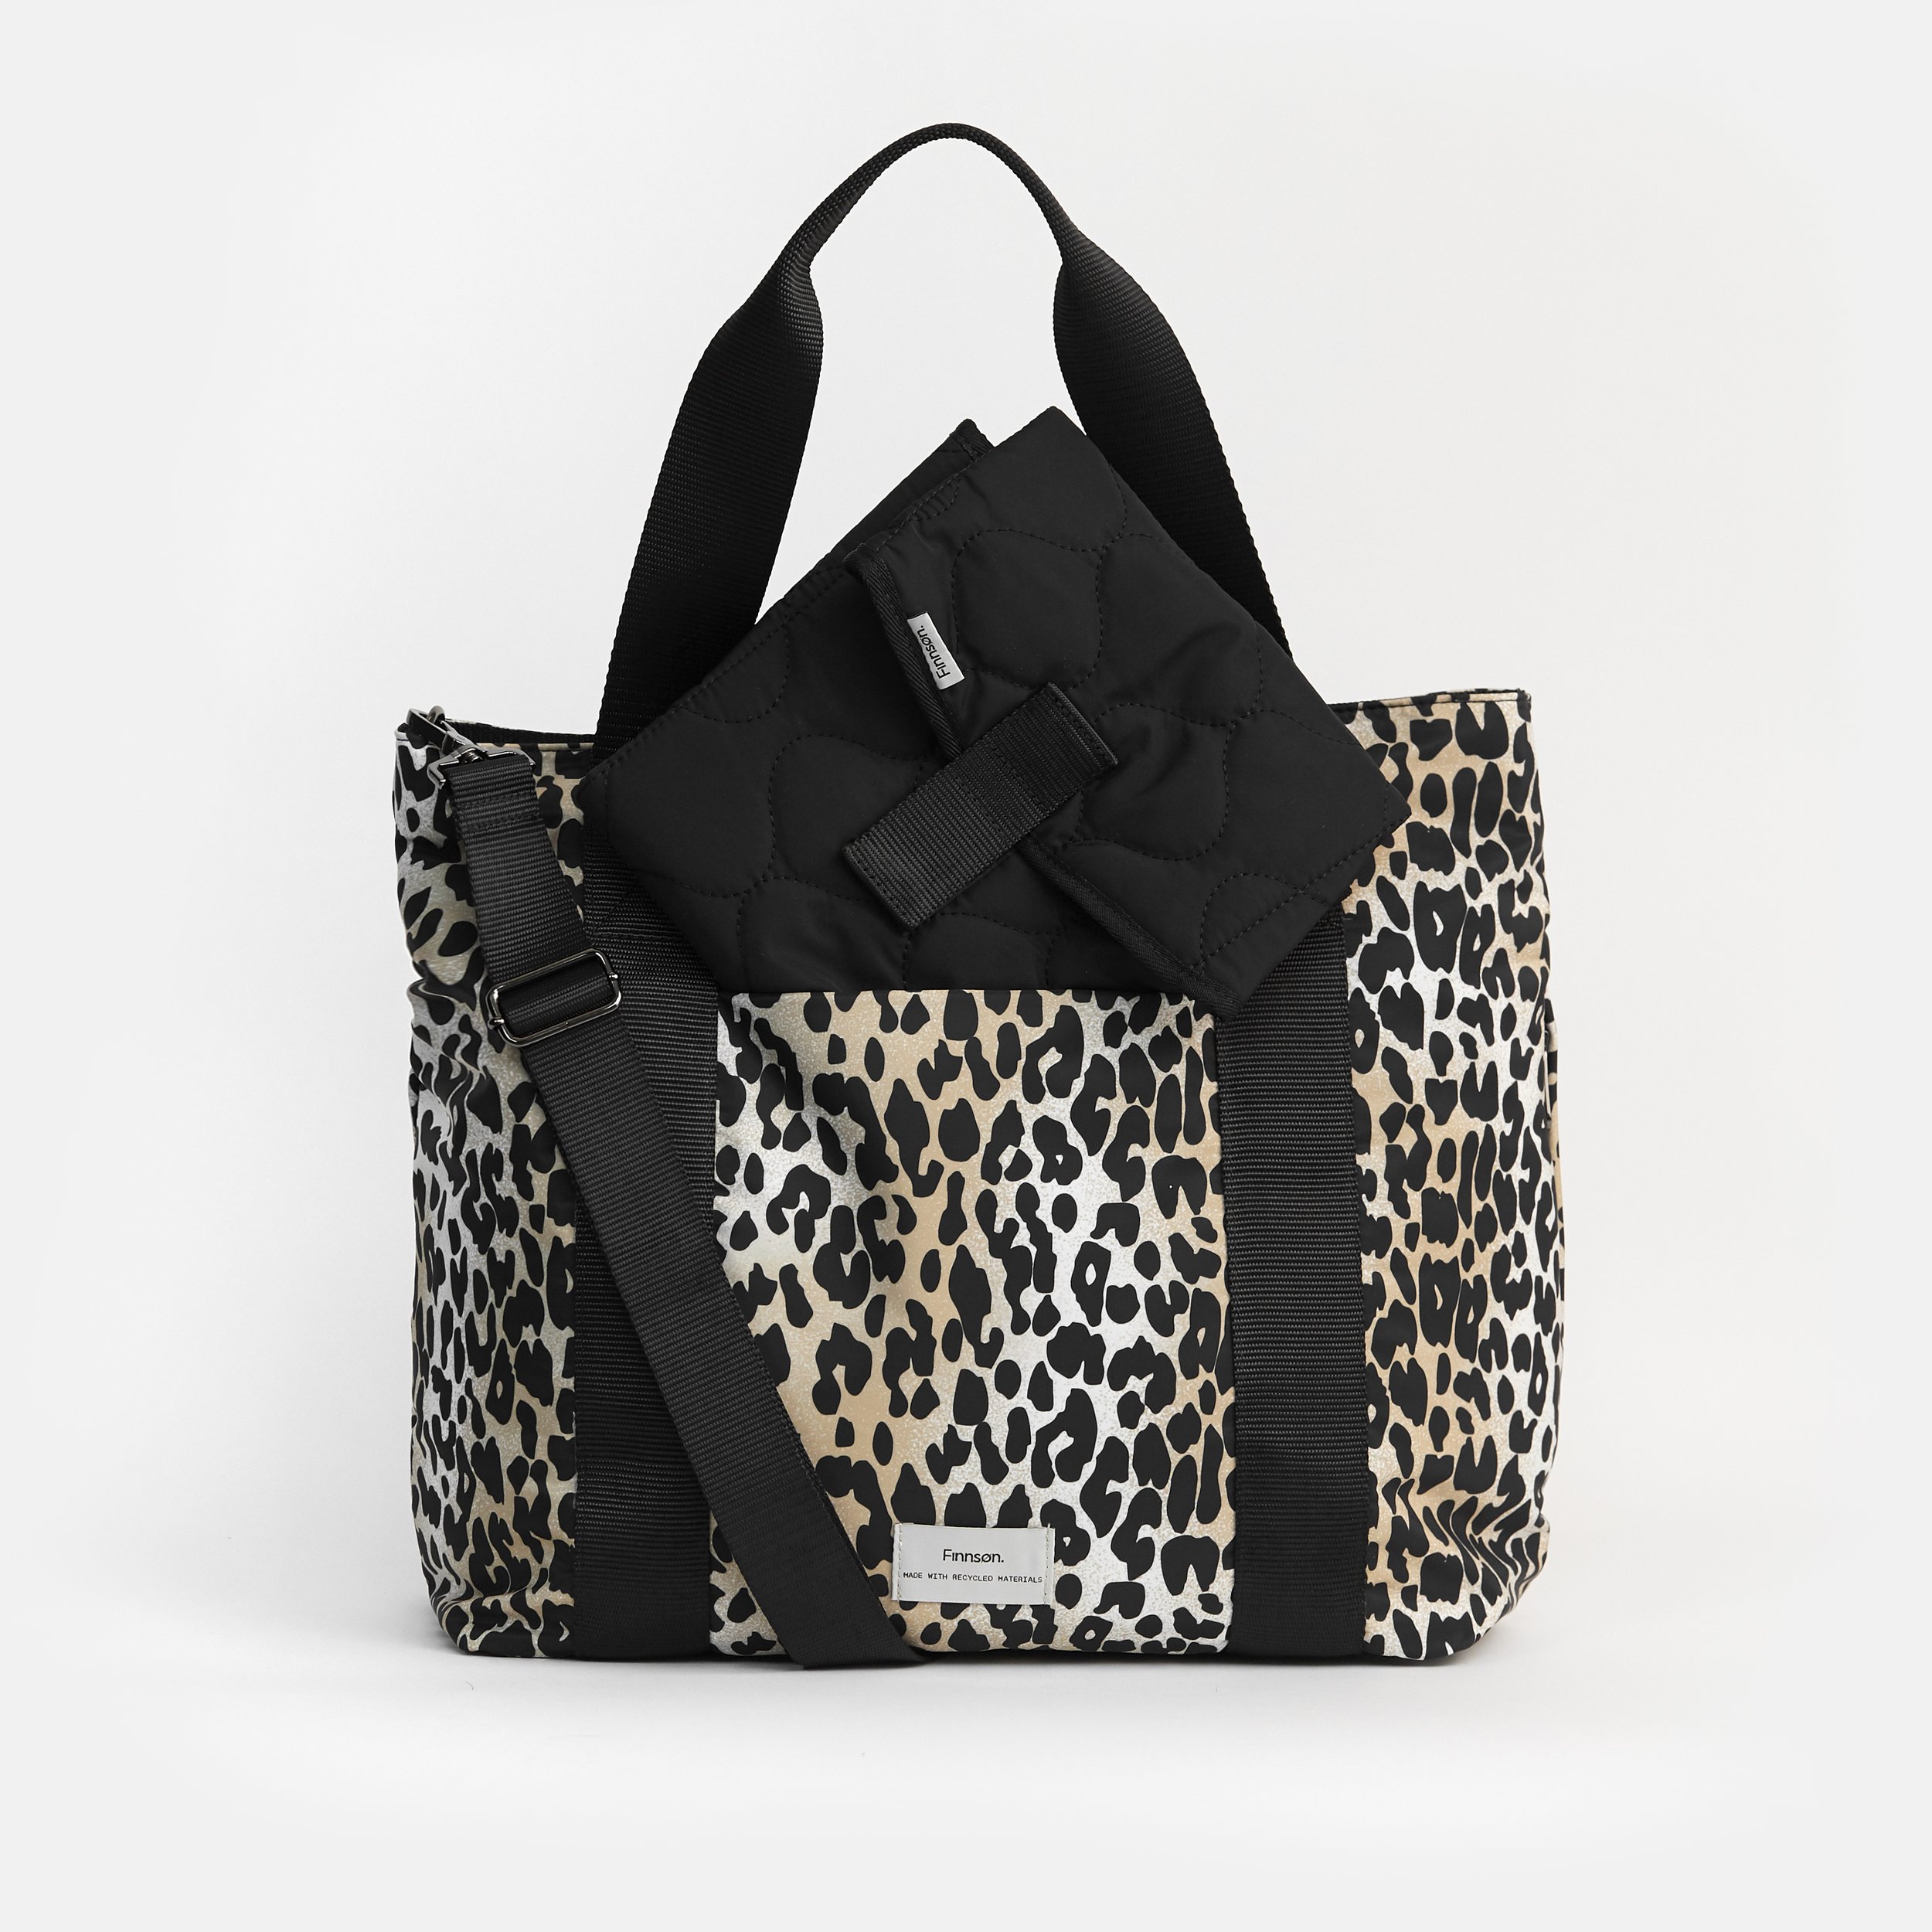 FINNSON SELBY Eco Changing Bag-LEOPARD 2.jpg